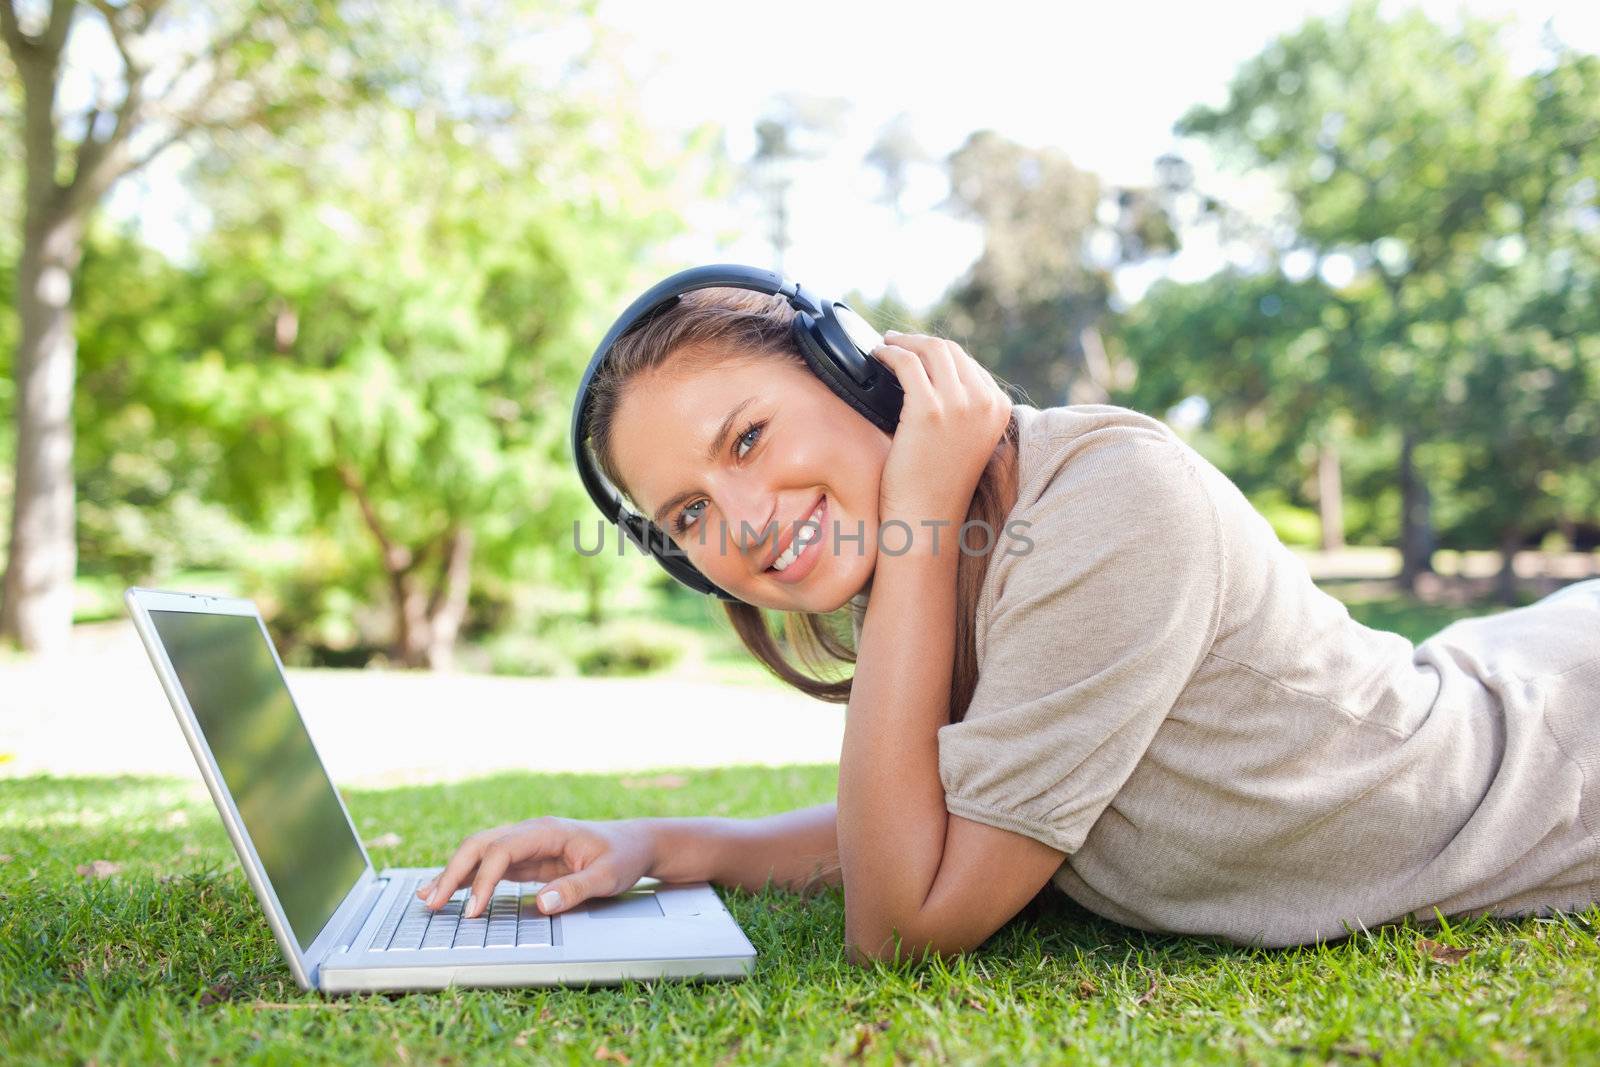 Side view of a smiling young woman with headphones and a laptop lying on the lawn